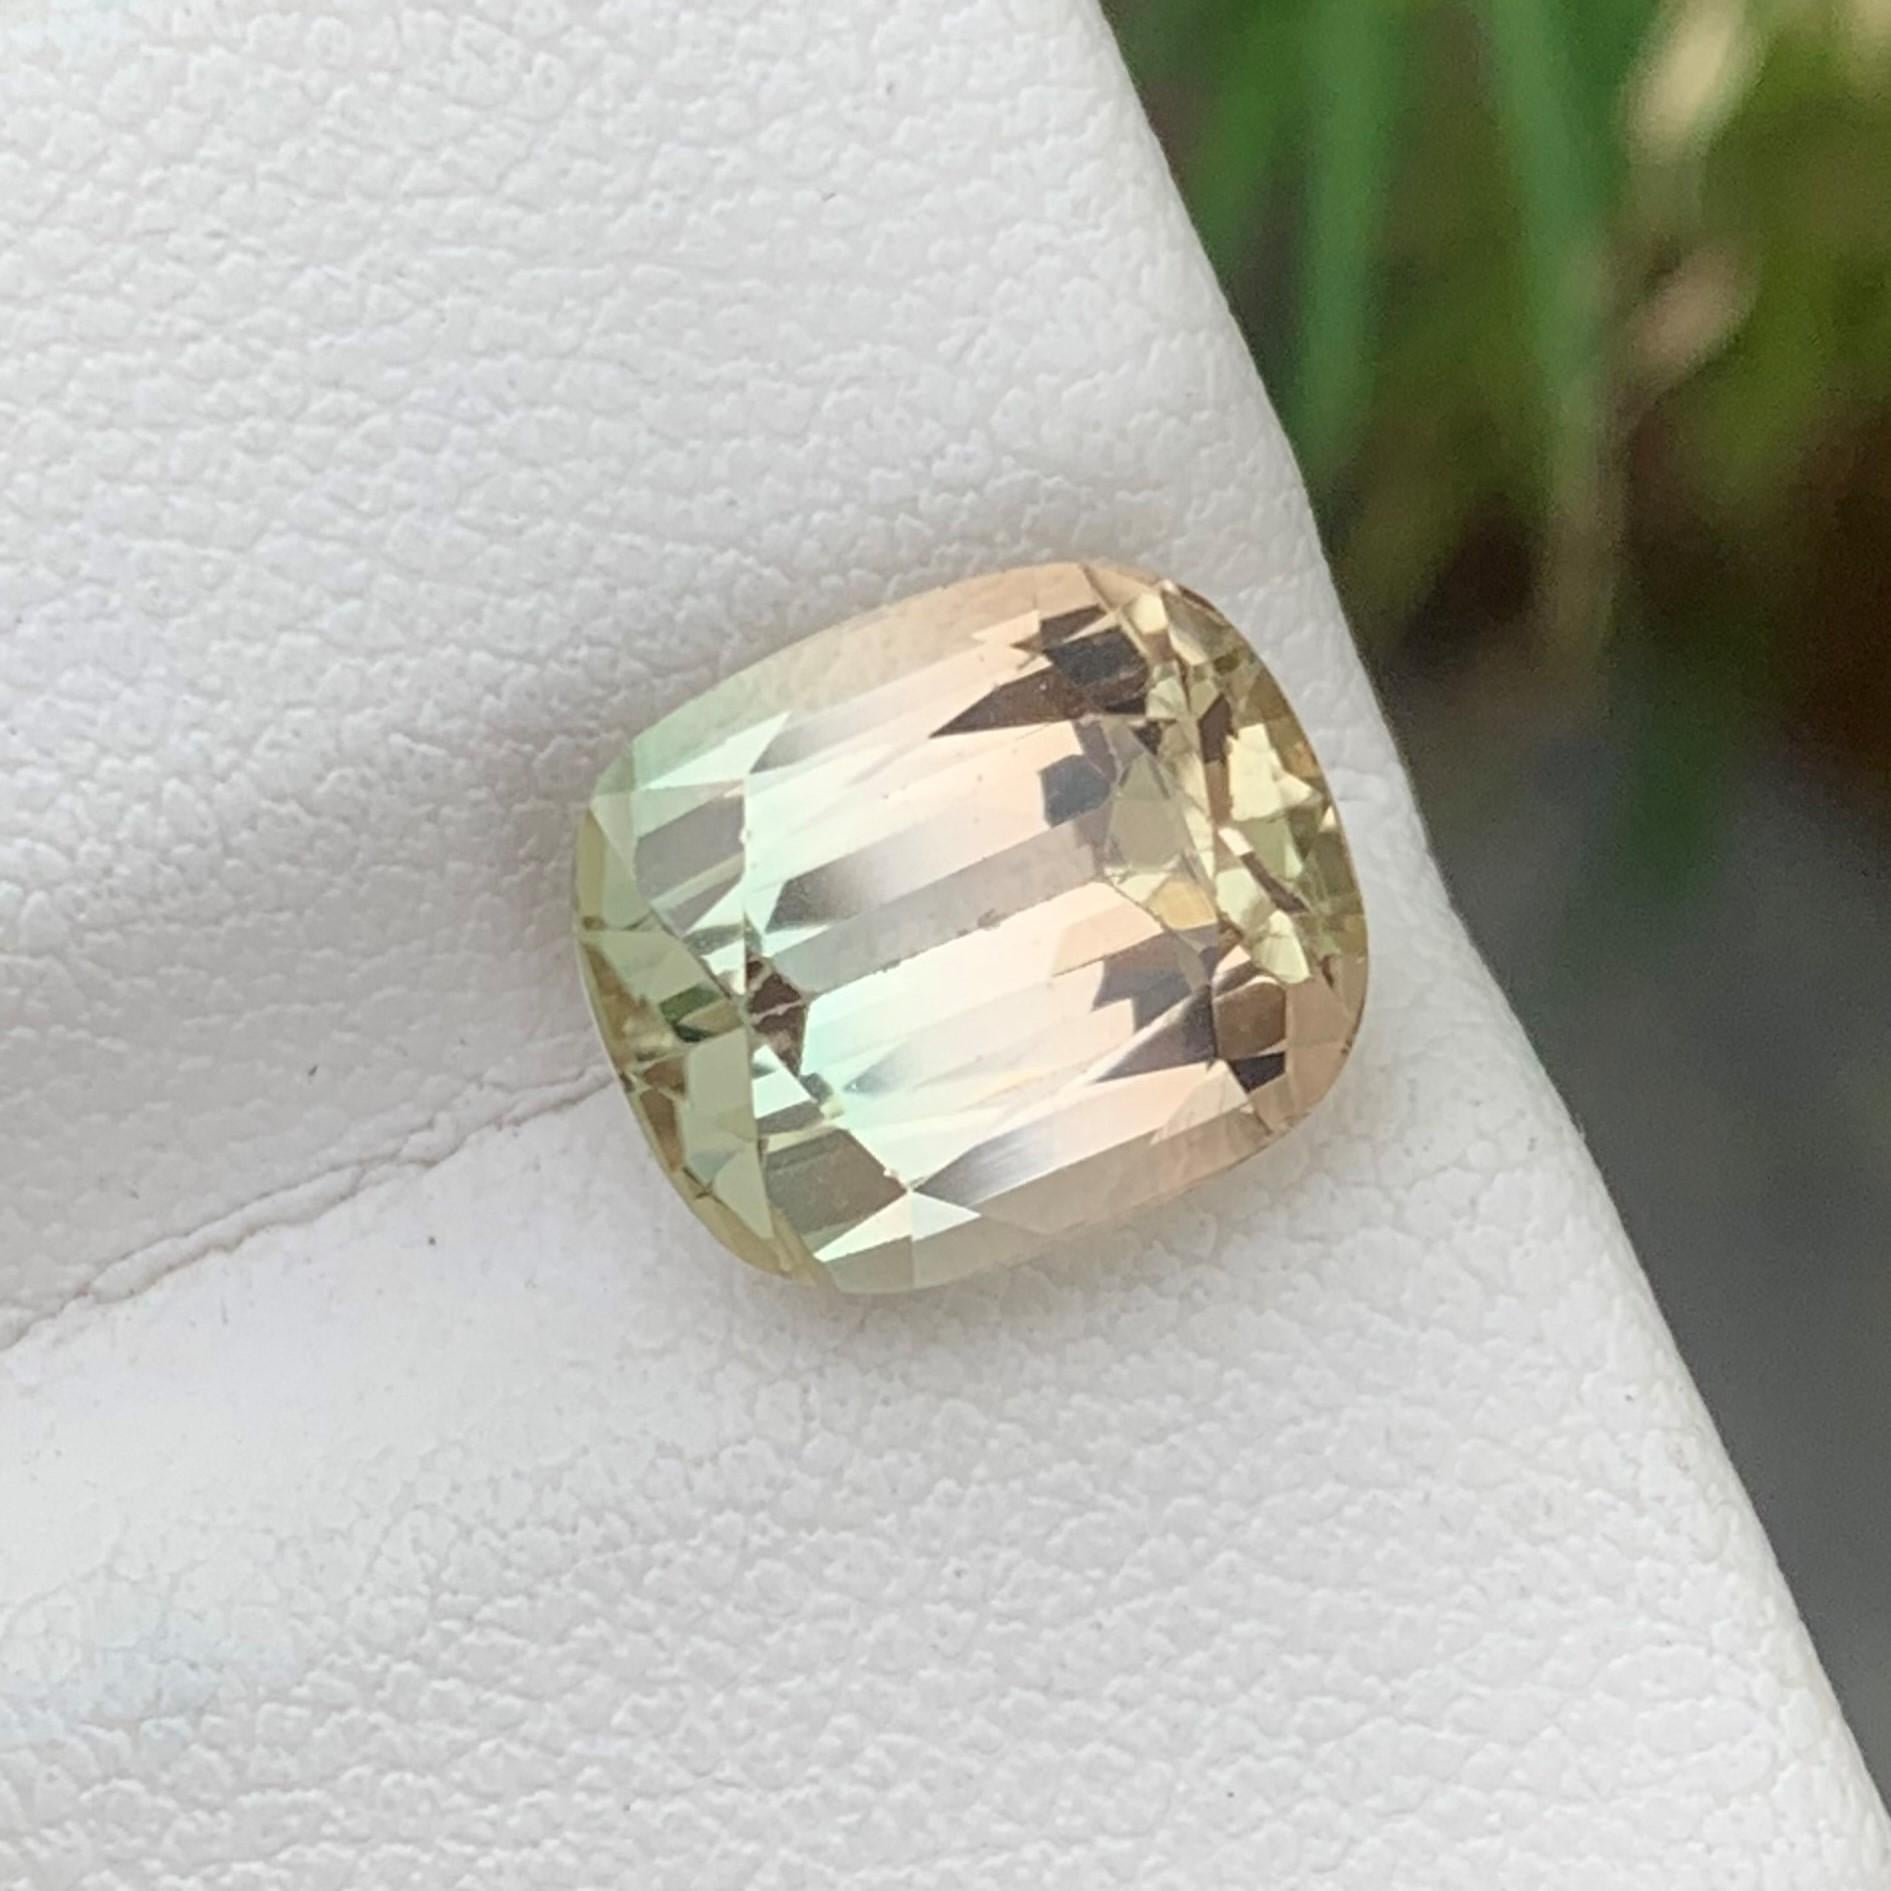 Faceted Bicolor Tourmaline
Weight: 4.60 Carats
Dimension: 9.9x8.6x7 Mm
Origin: Afghanistan
Color: Peach & Light Green
Shape: Cushion
Quality: AAA
Certificate: On Demand
.
Bicolor tourmaline is connected to the heart chakra, which makes it good for